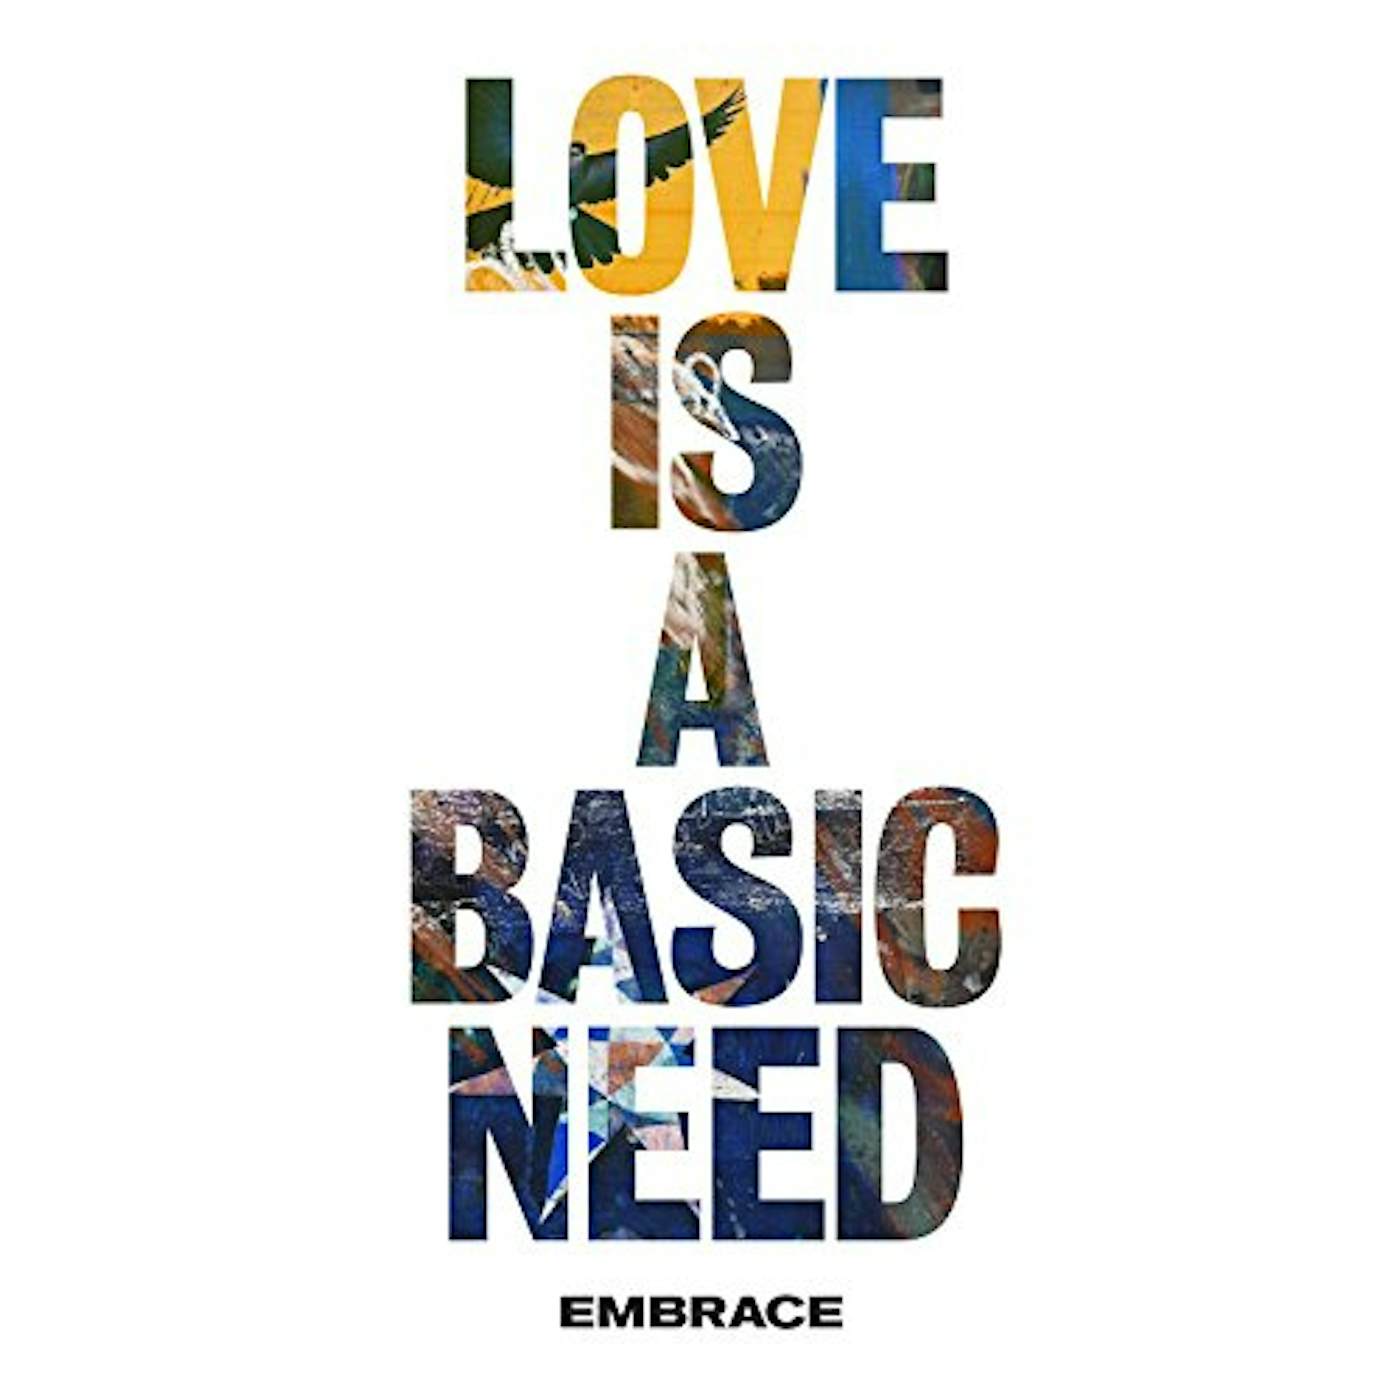 Embrace Love is a Basic Need Vinyl Record